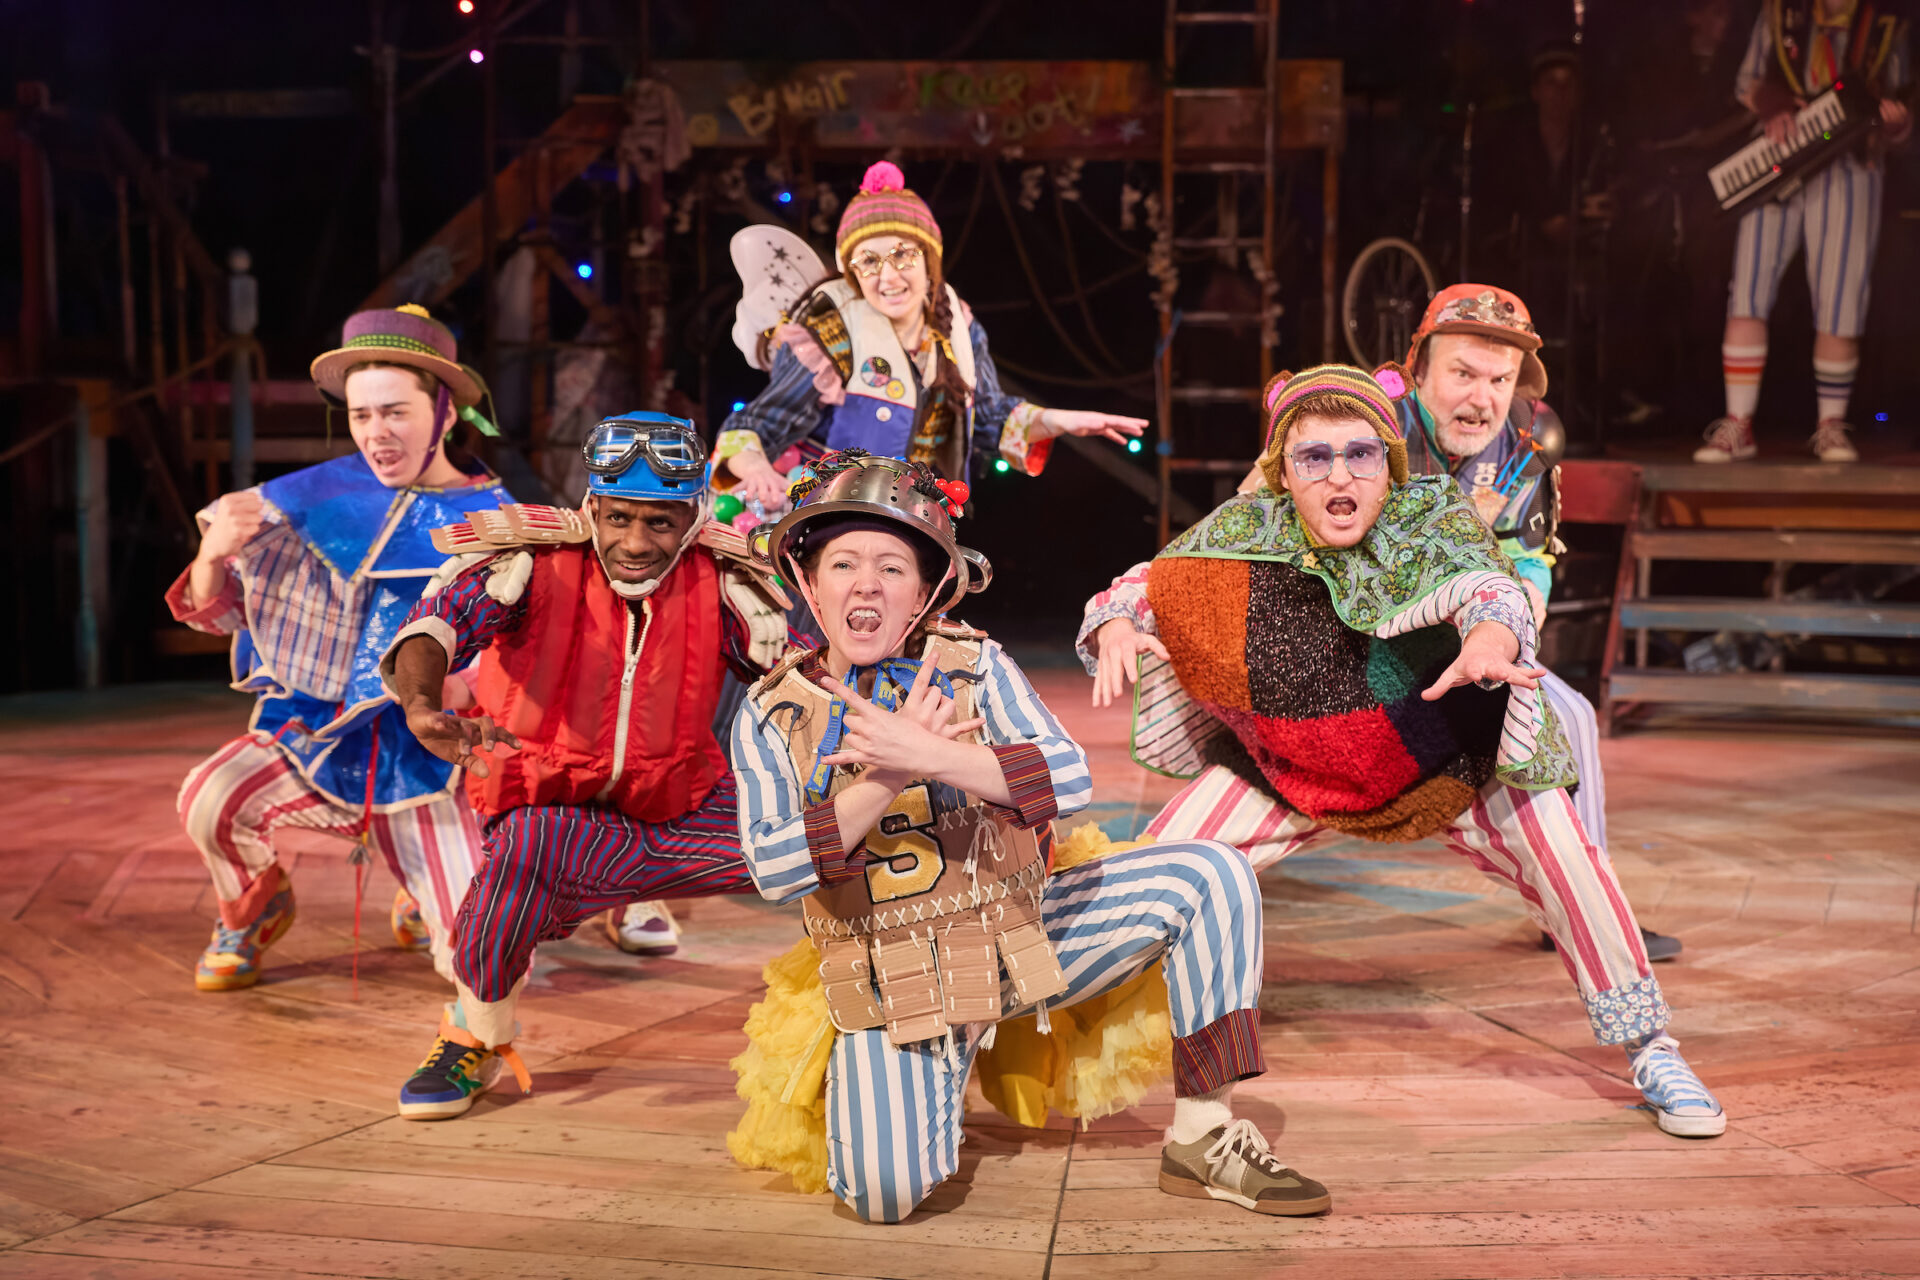 Edward Lee (Apprentice Actor), Kevin McIntosh (Michael / Jack), Elinor O'Leary (Apprentice Actor), Rebecca Killick (Tiger / Nana / Slightly), Owen Alun (Tink / Skylights) and Keiron Self (Mr Darling / Smee / Tootles) in Peter Pan. Image: Mark Douet